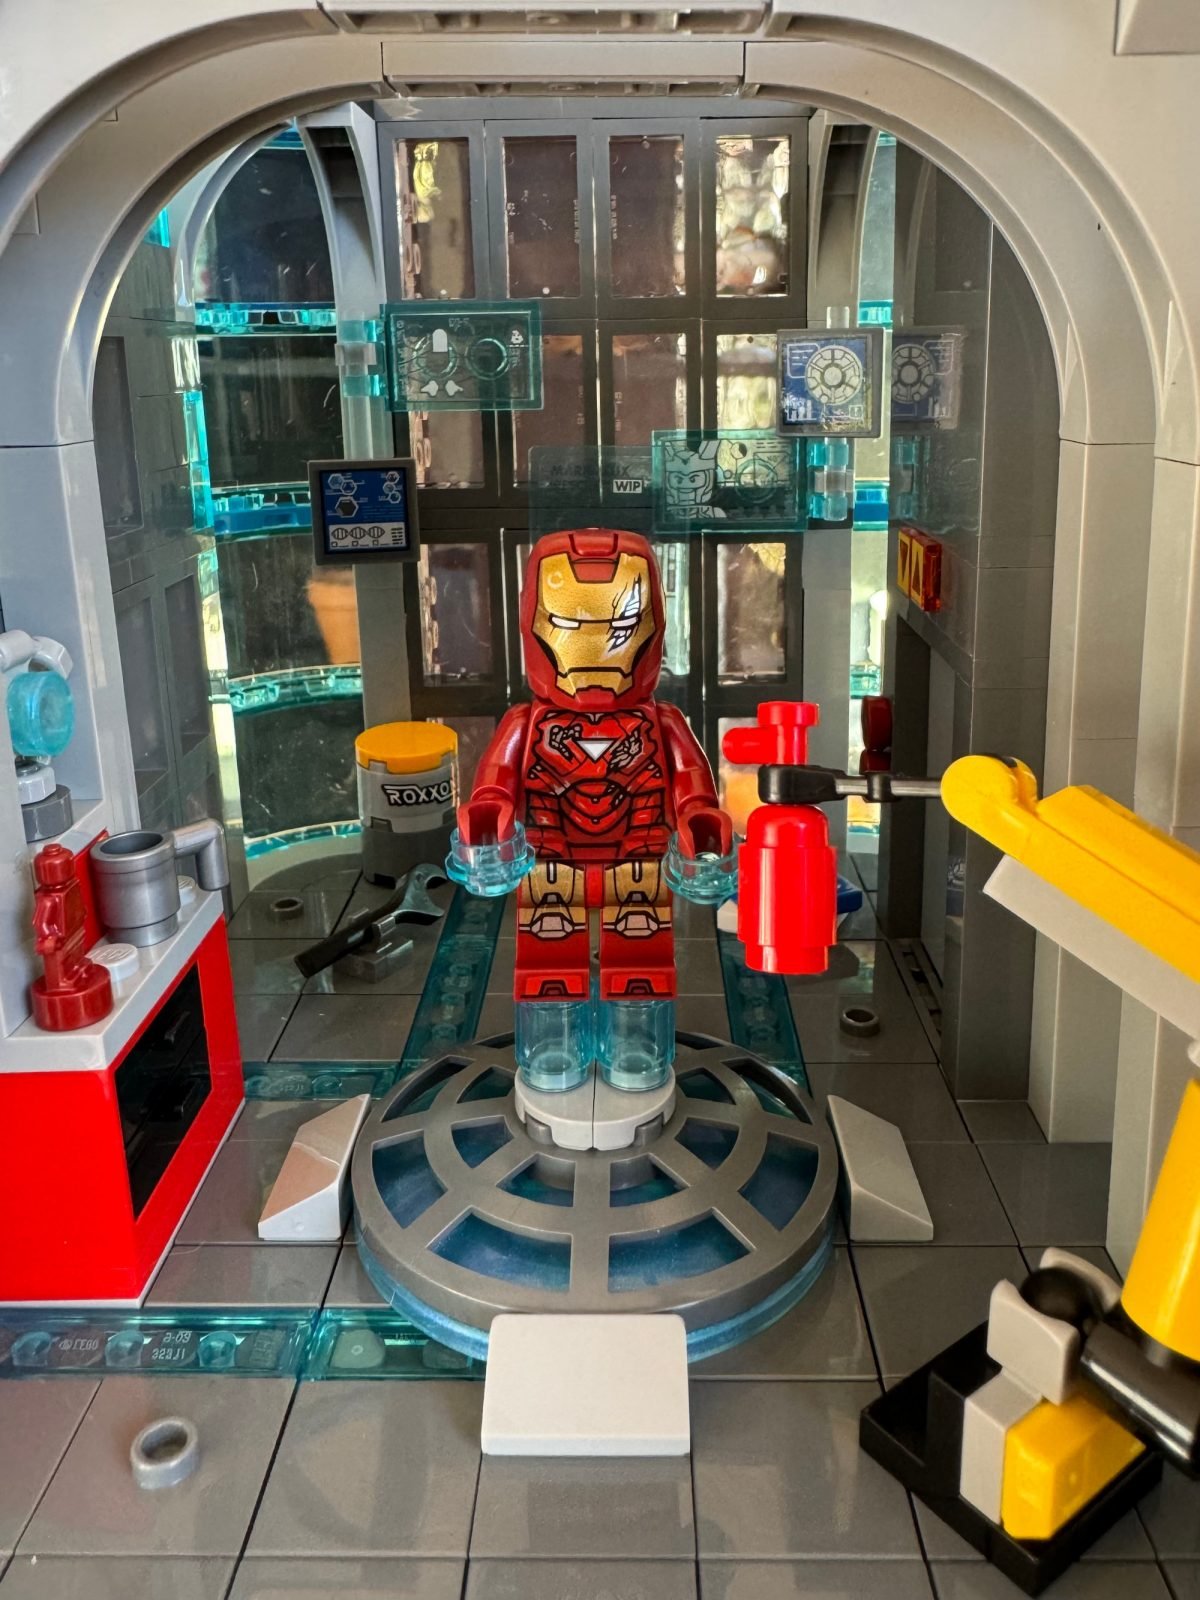 A damaged Iron Man minifig in a chamber